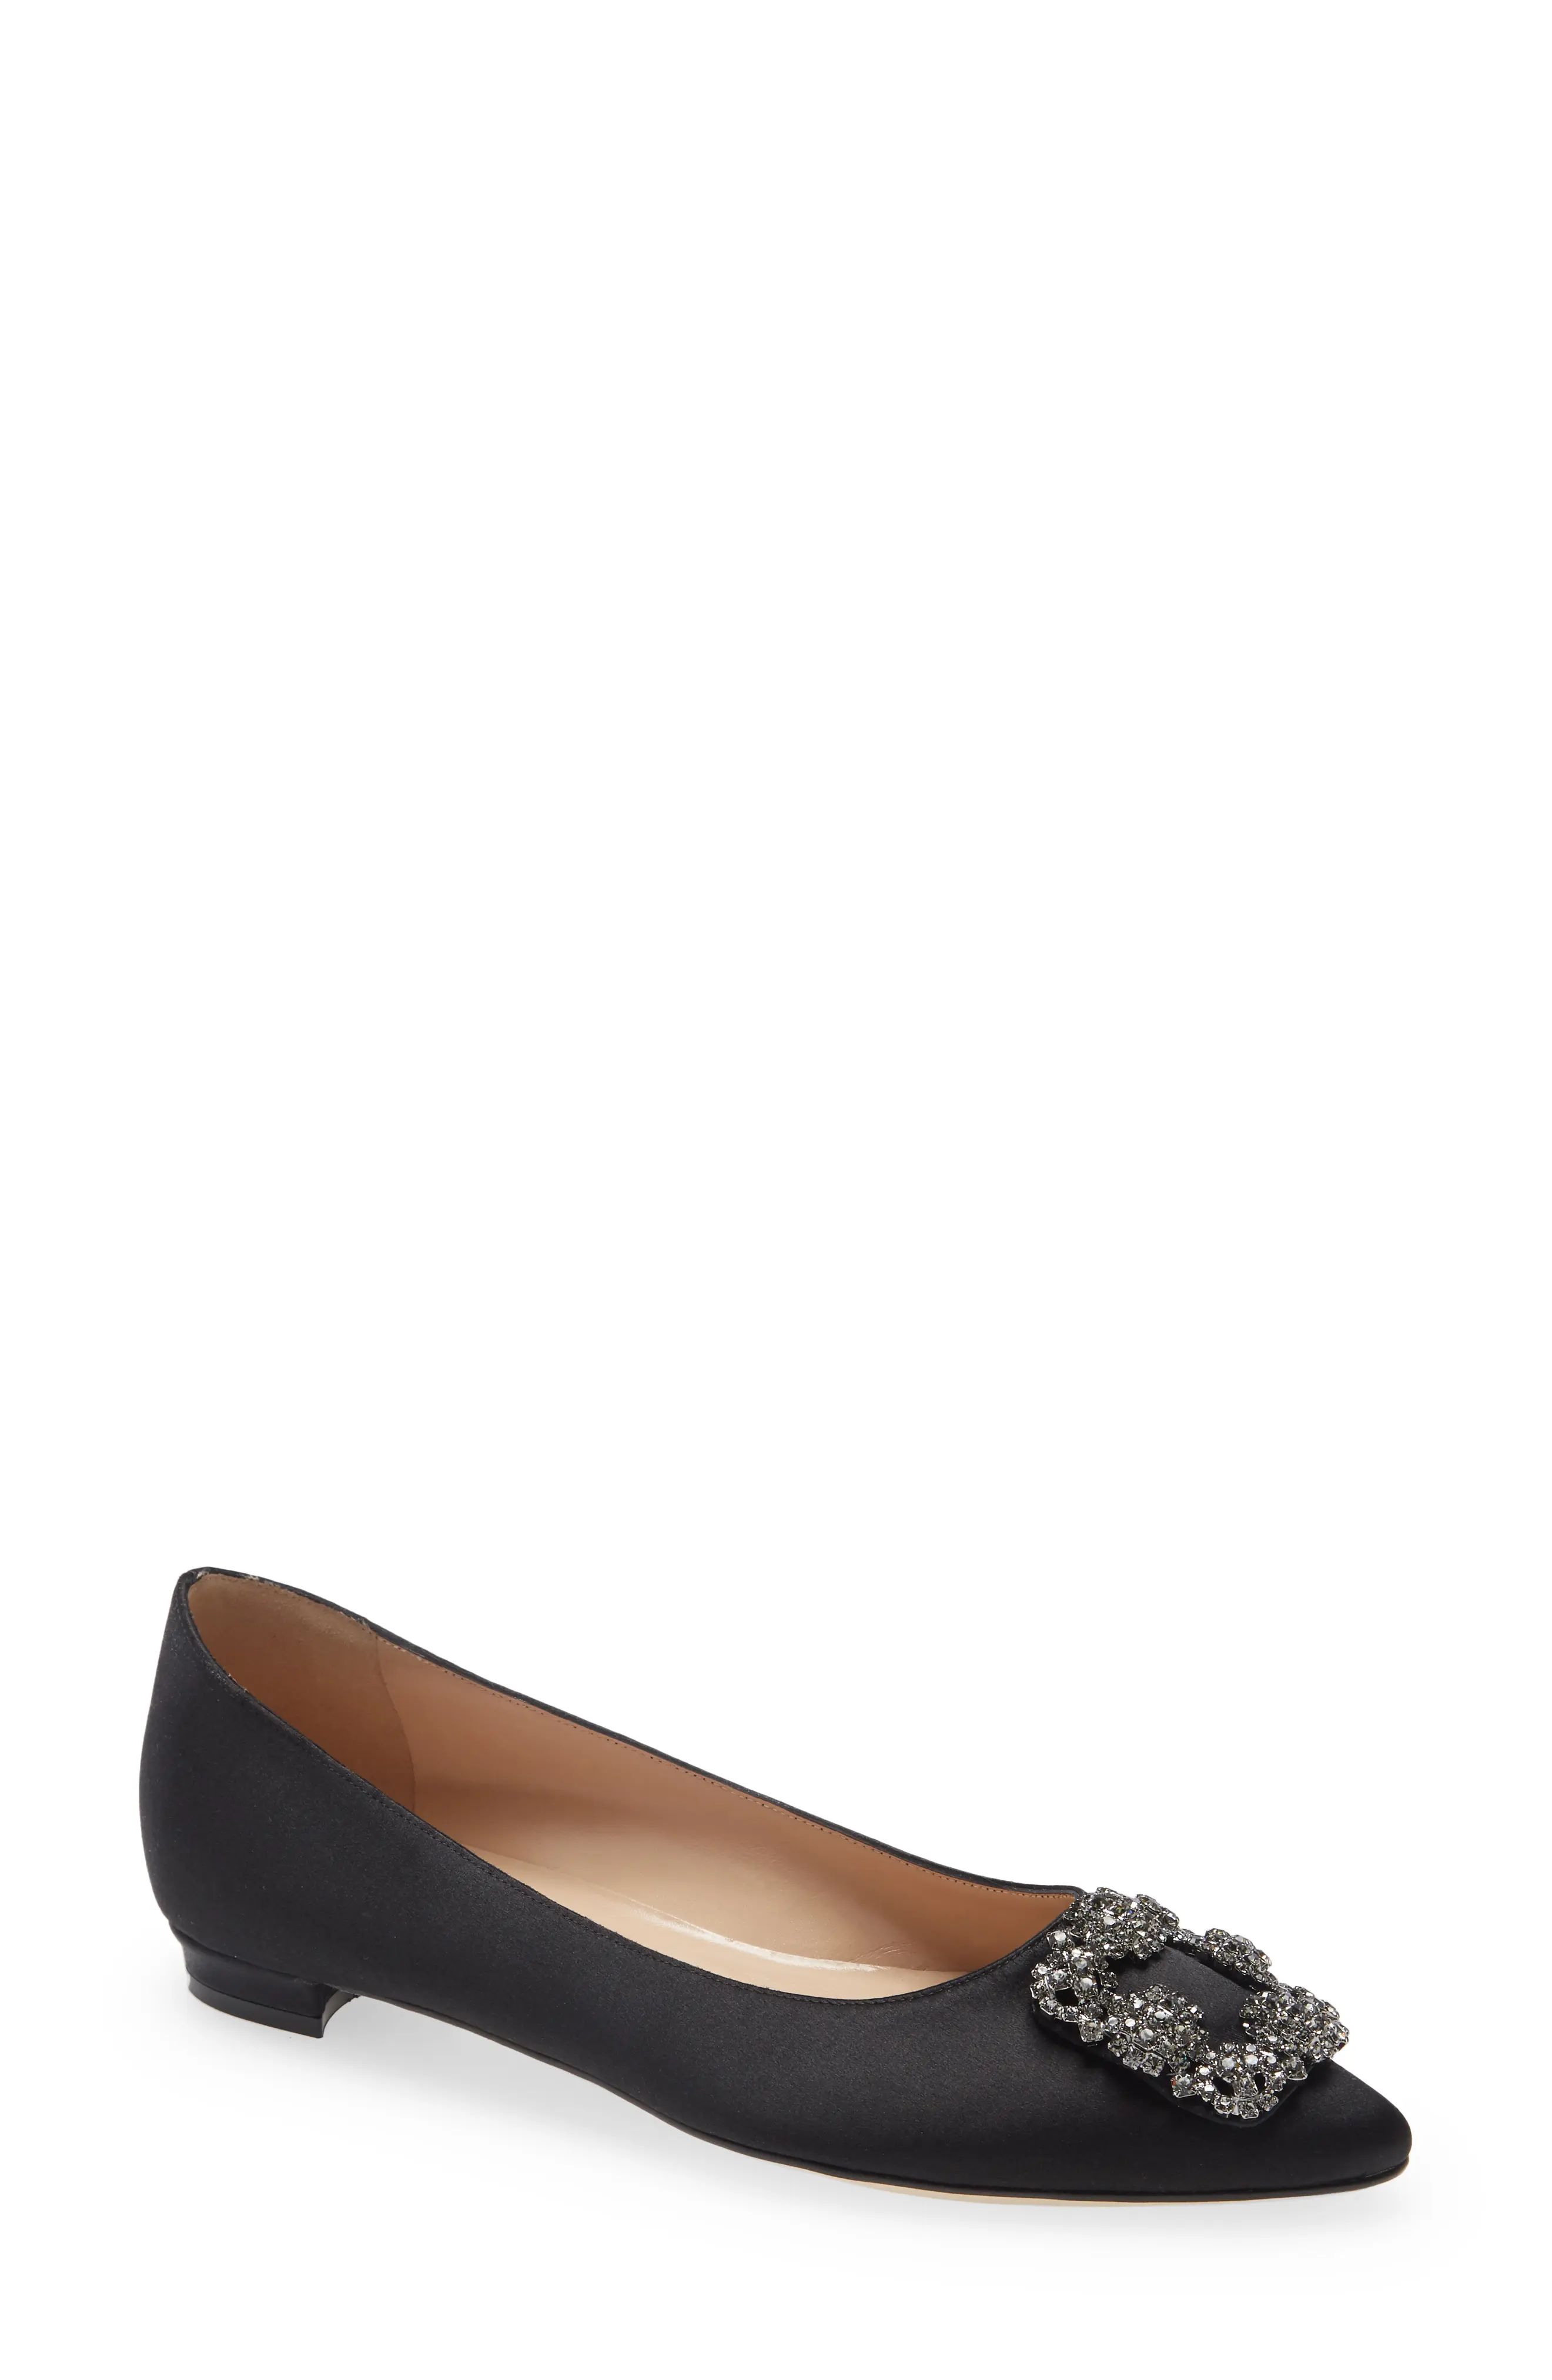 Manolo Blahnik Hangisi Jeweled Pointy Toe Flat in Black Satin/Classic Buckle at Nordstrom, Size 8Us | Nordstrom